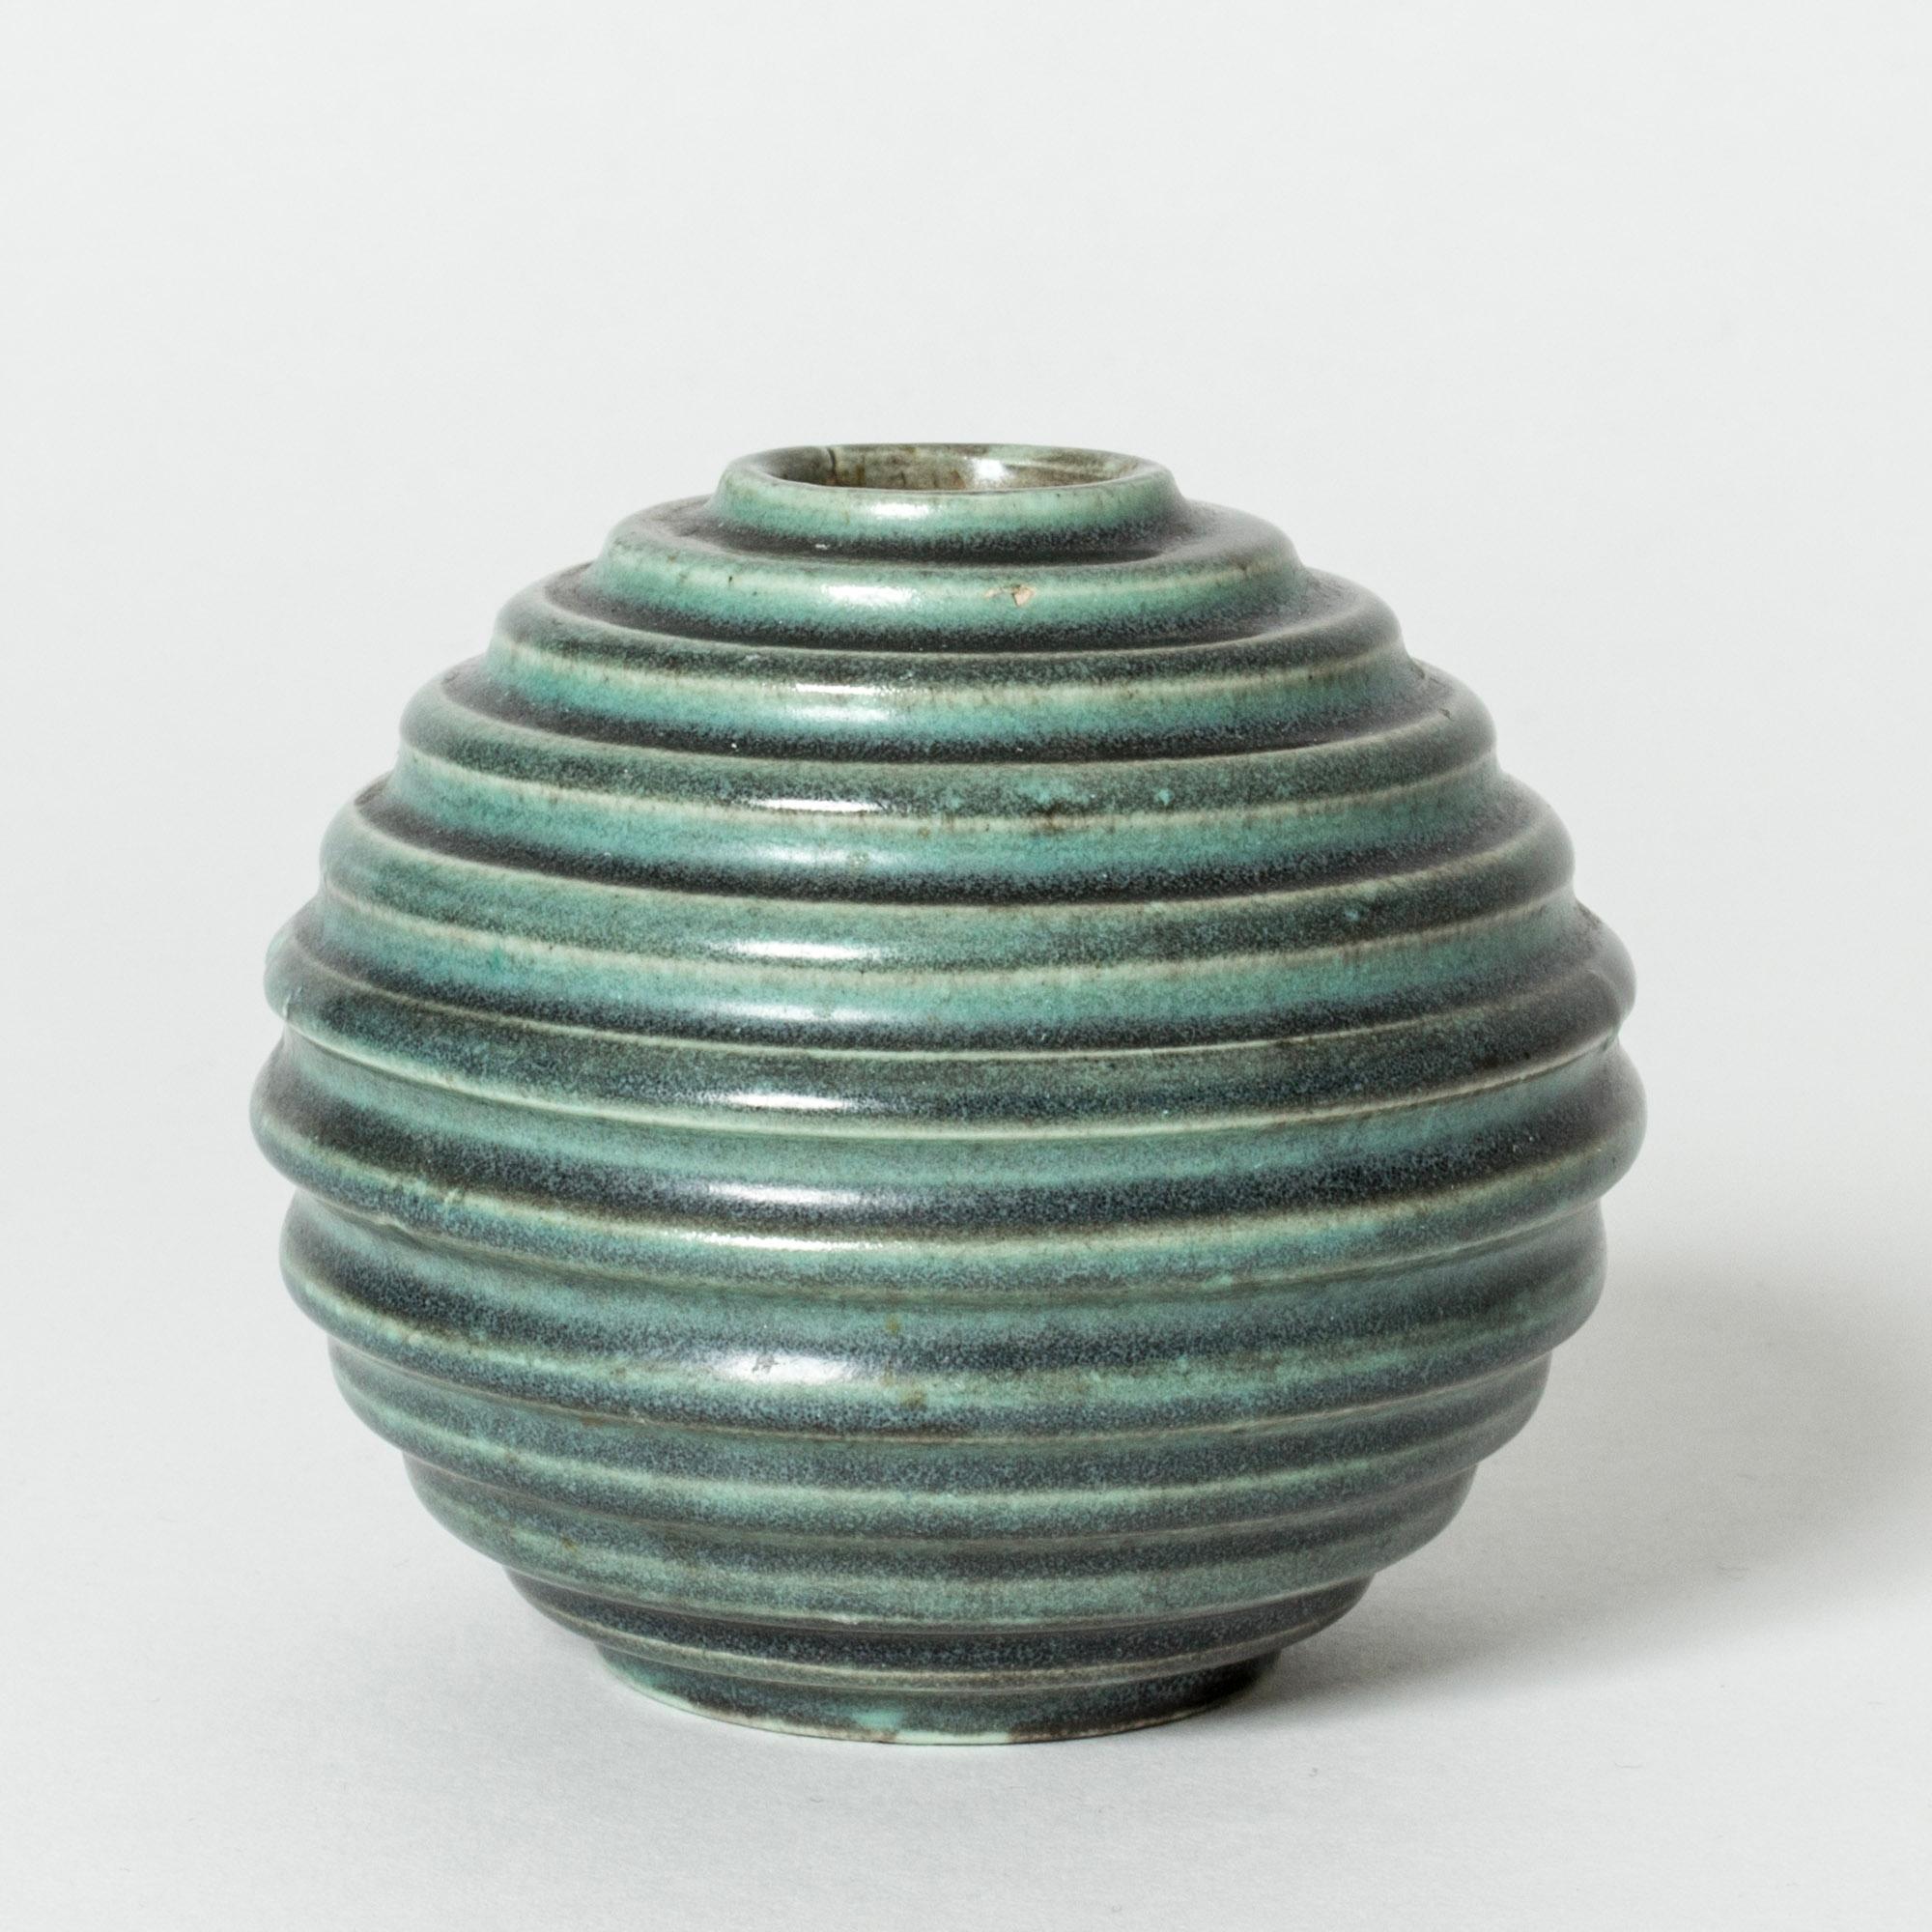 Small stoneware vase by Ewald Dahlskog, in a globe form with embossed stripes. Glazed green with black streaks. This signature design by Dahlskog was first introduced at the Stockholm Exhibition in 1930.